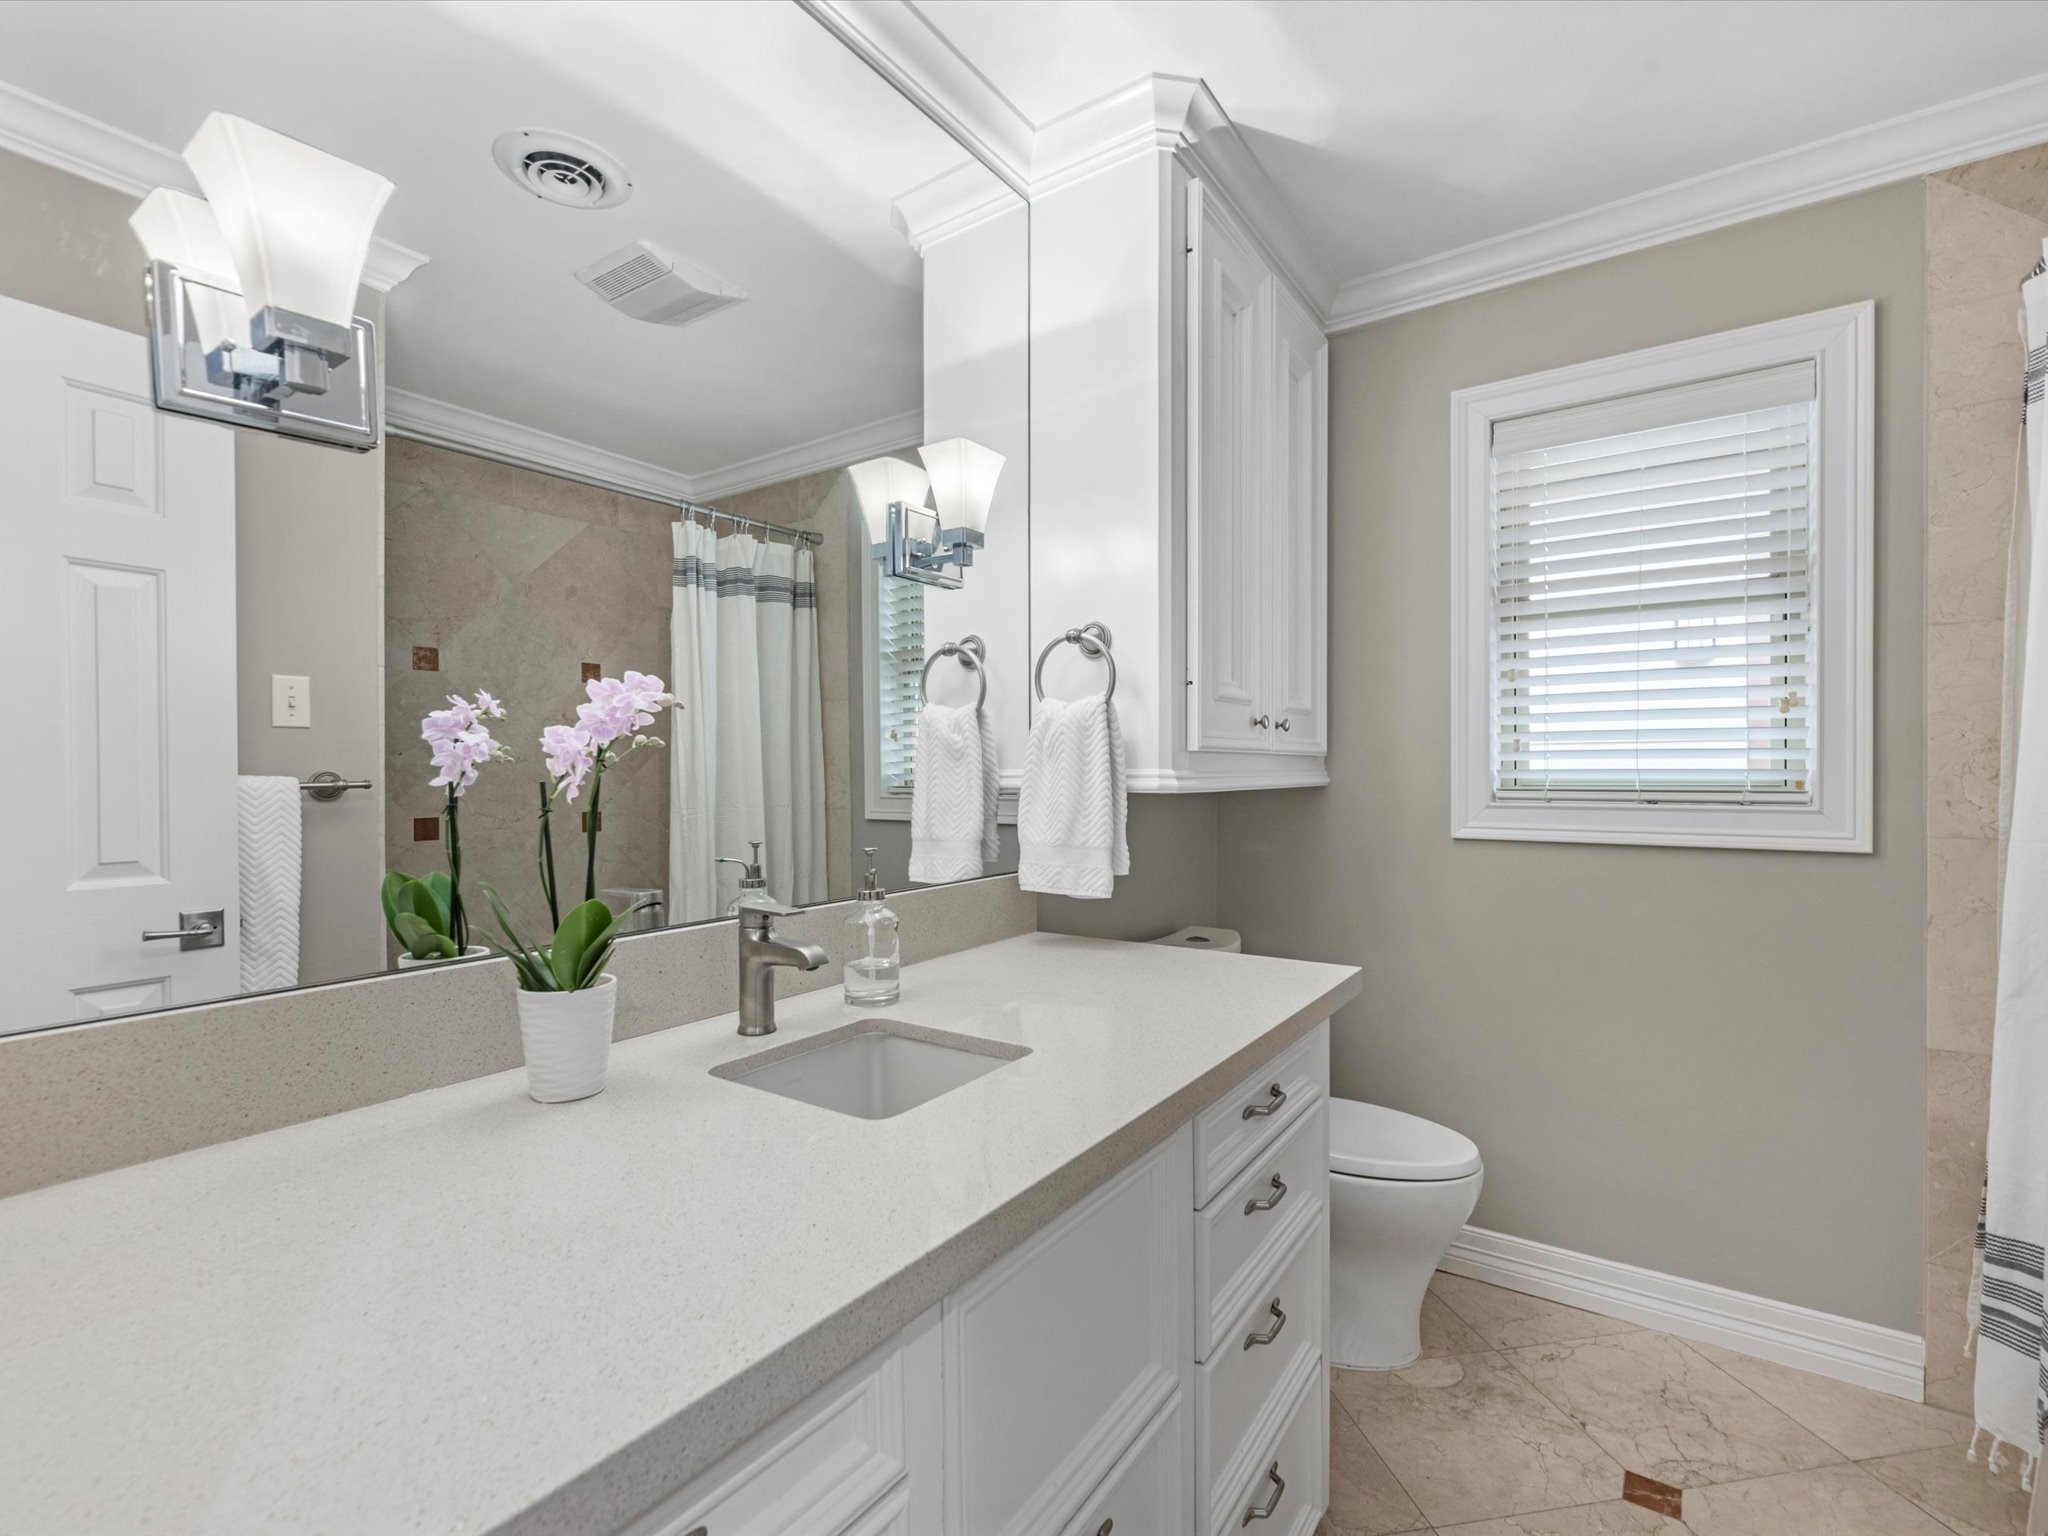 The third full bathroom is across the hall from the third bedroom, and has a tub/shower combo.